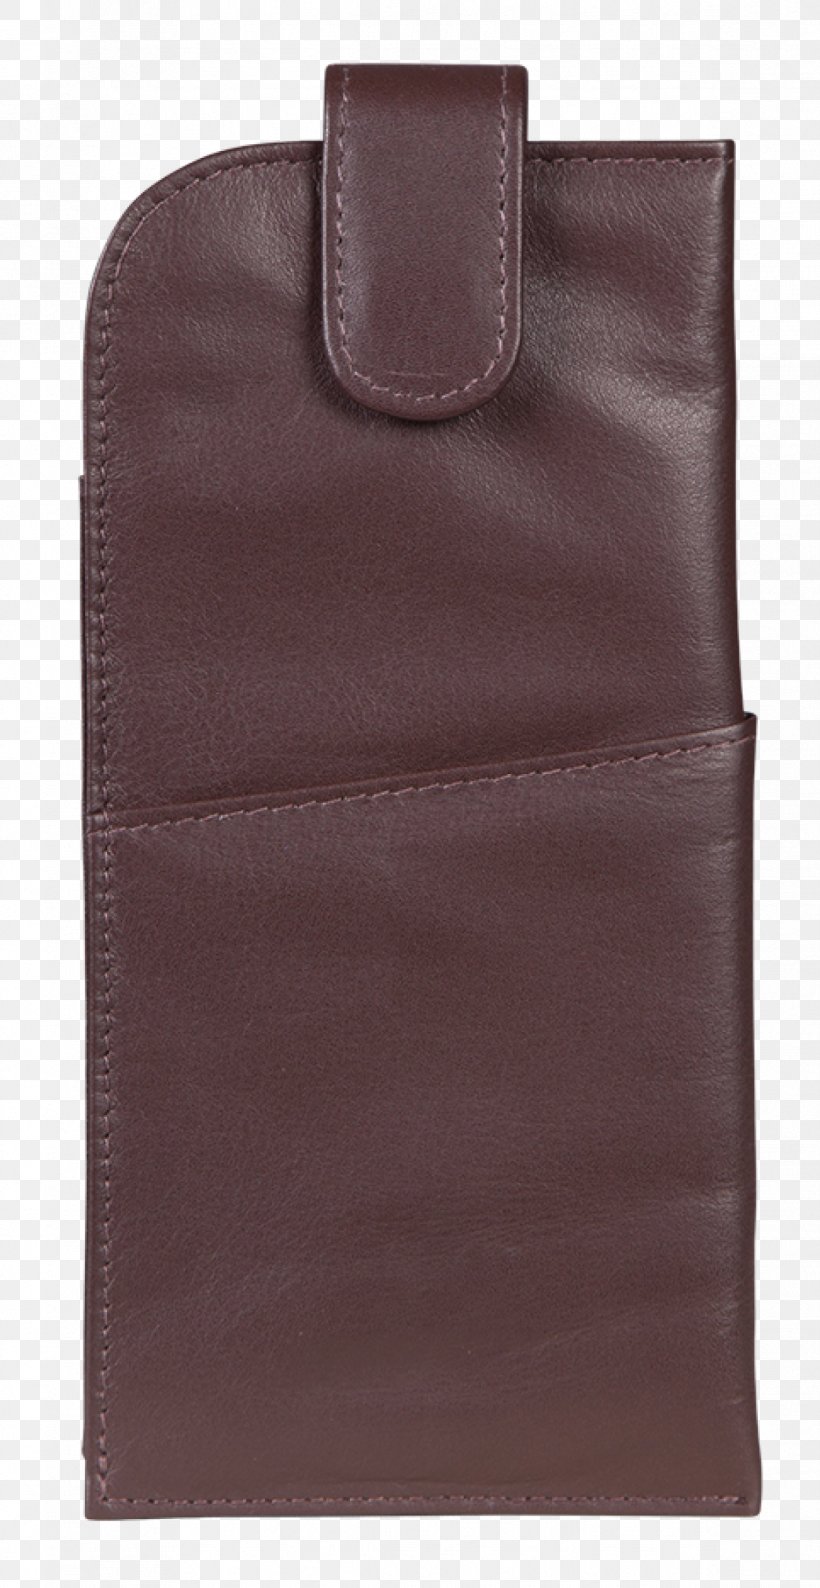 Wallet Coin Purse Pocket Bag, PNG, 1188x2302px, Wallet, Bag, Brown, Coin, Coin Purse Download Free